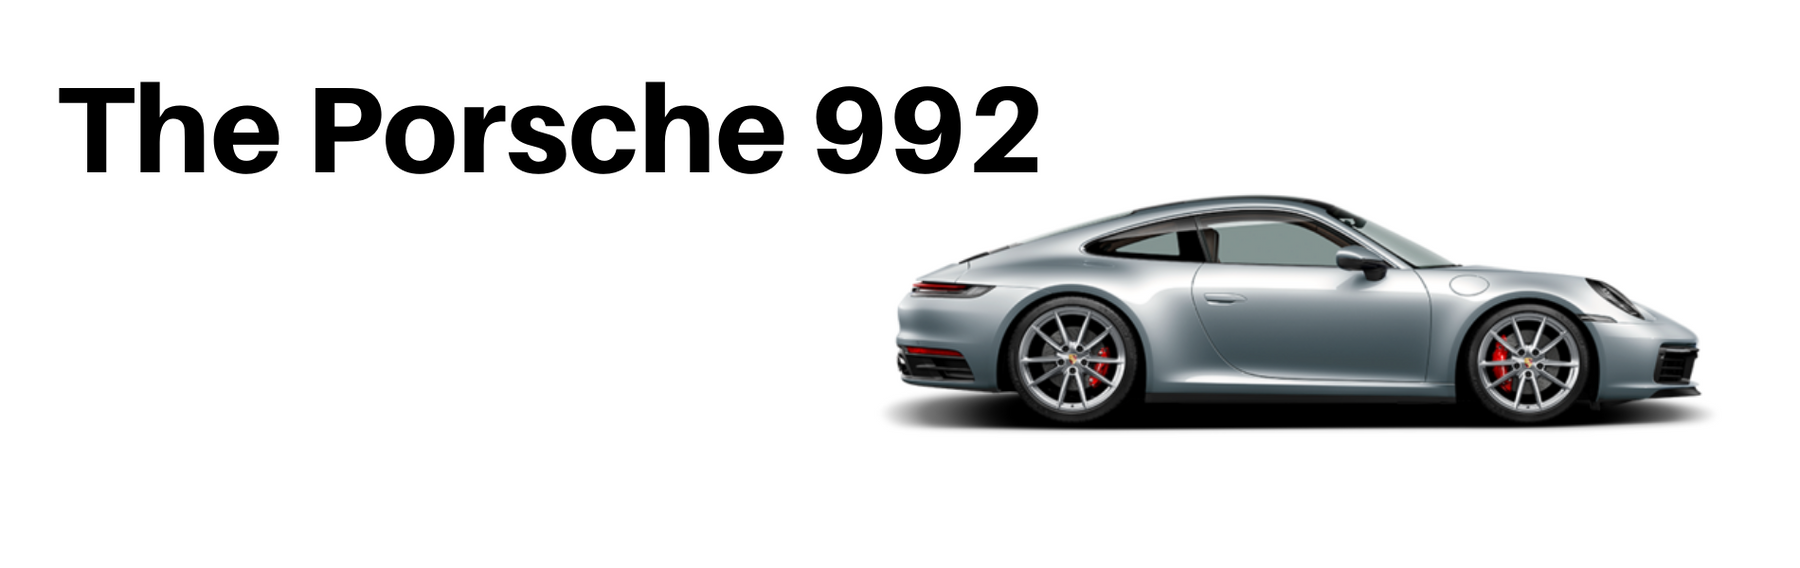 New 992 Products! [UPDATED]